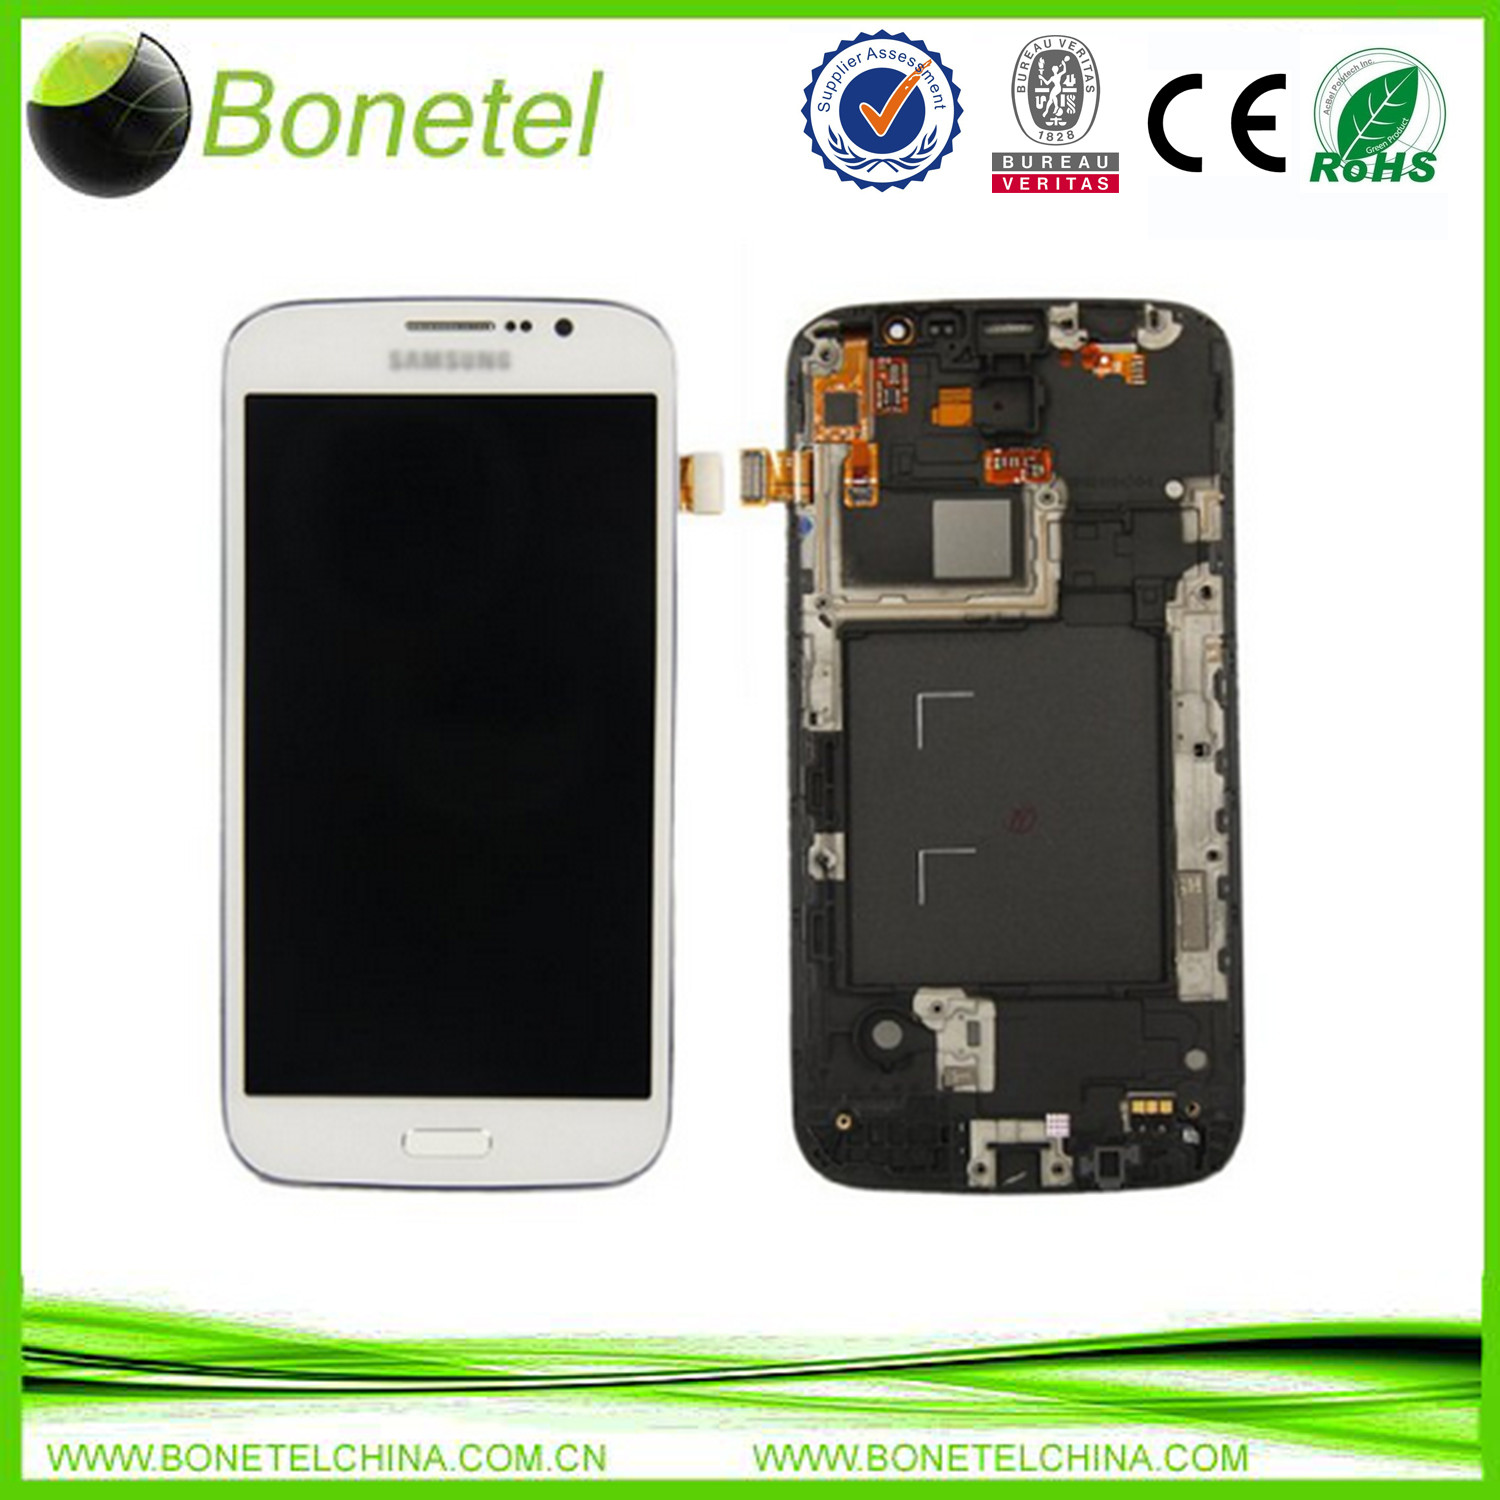 White Replacement for Samsung Galaxy Mega I9152 I9150 I9158 LCD Digitizer Screen Display with Frame